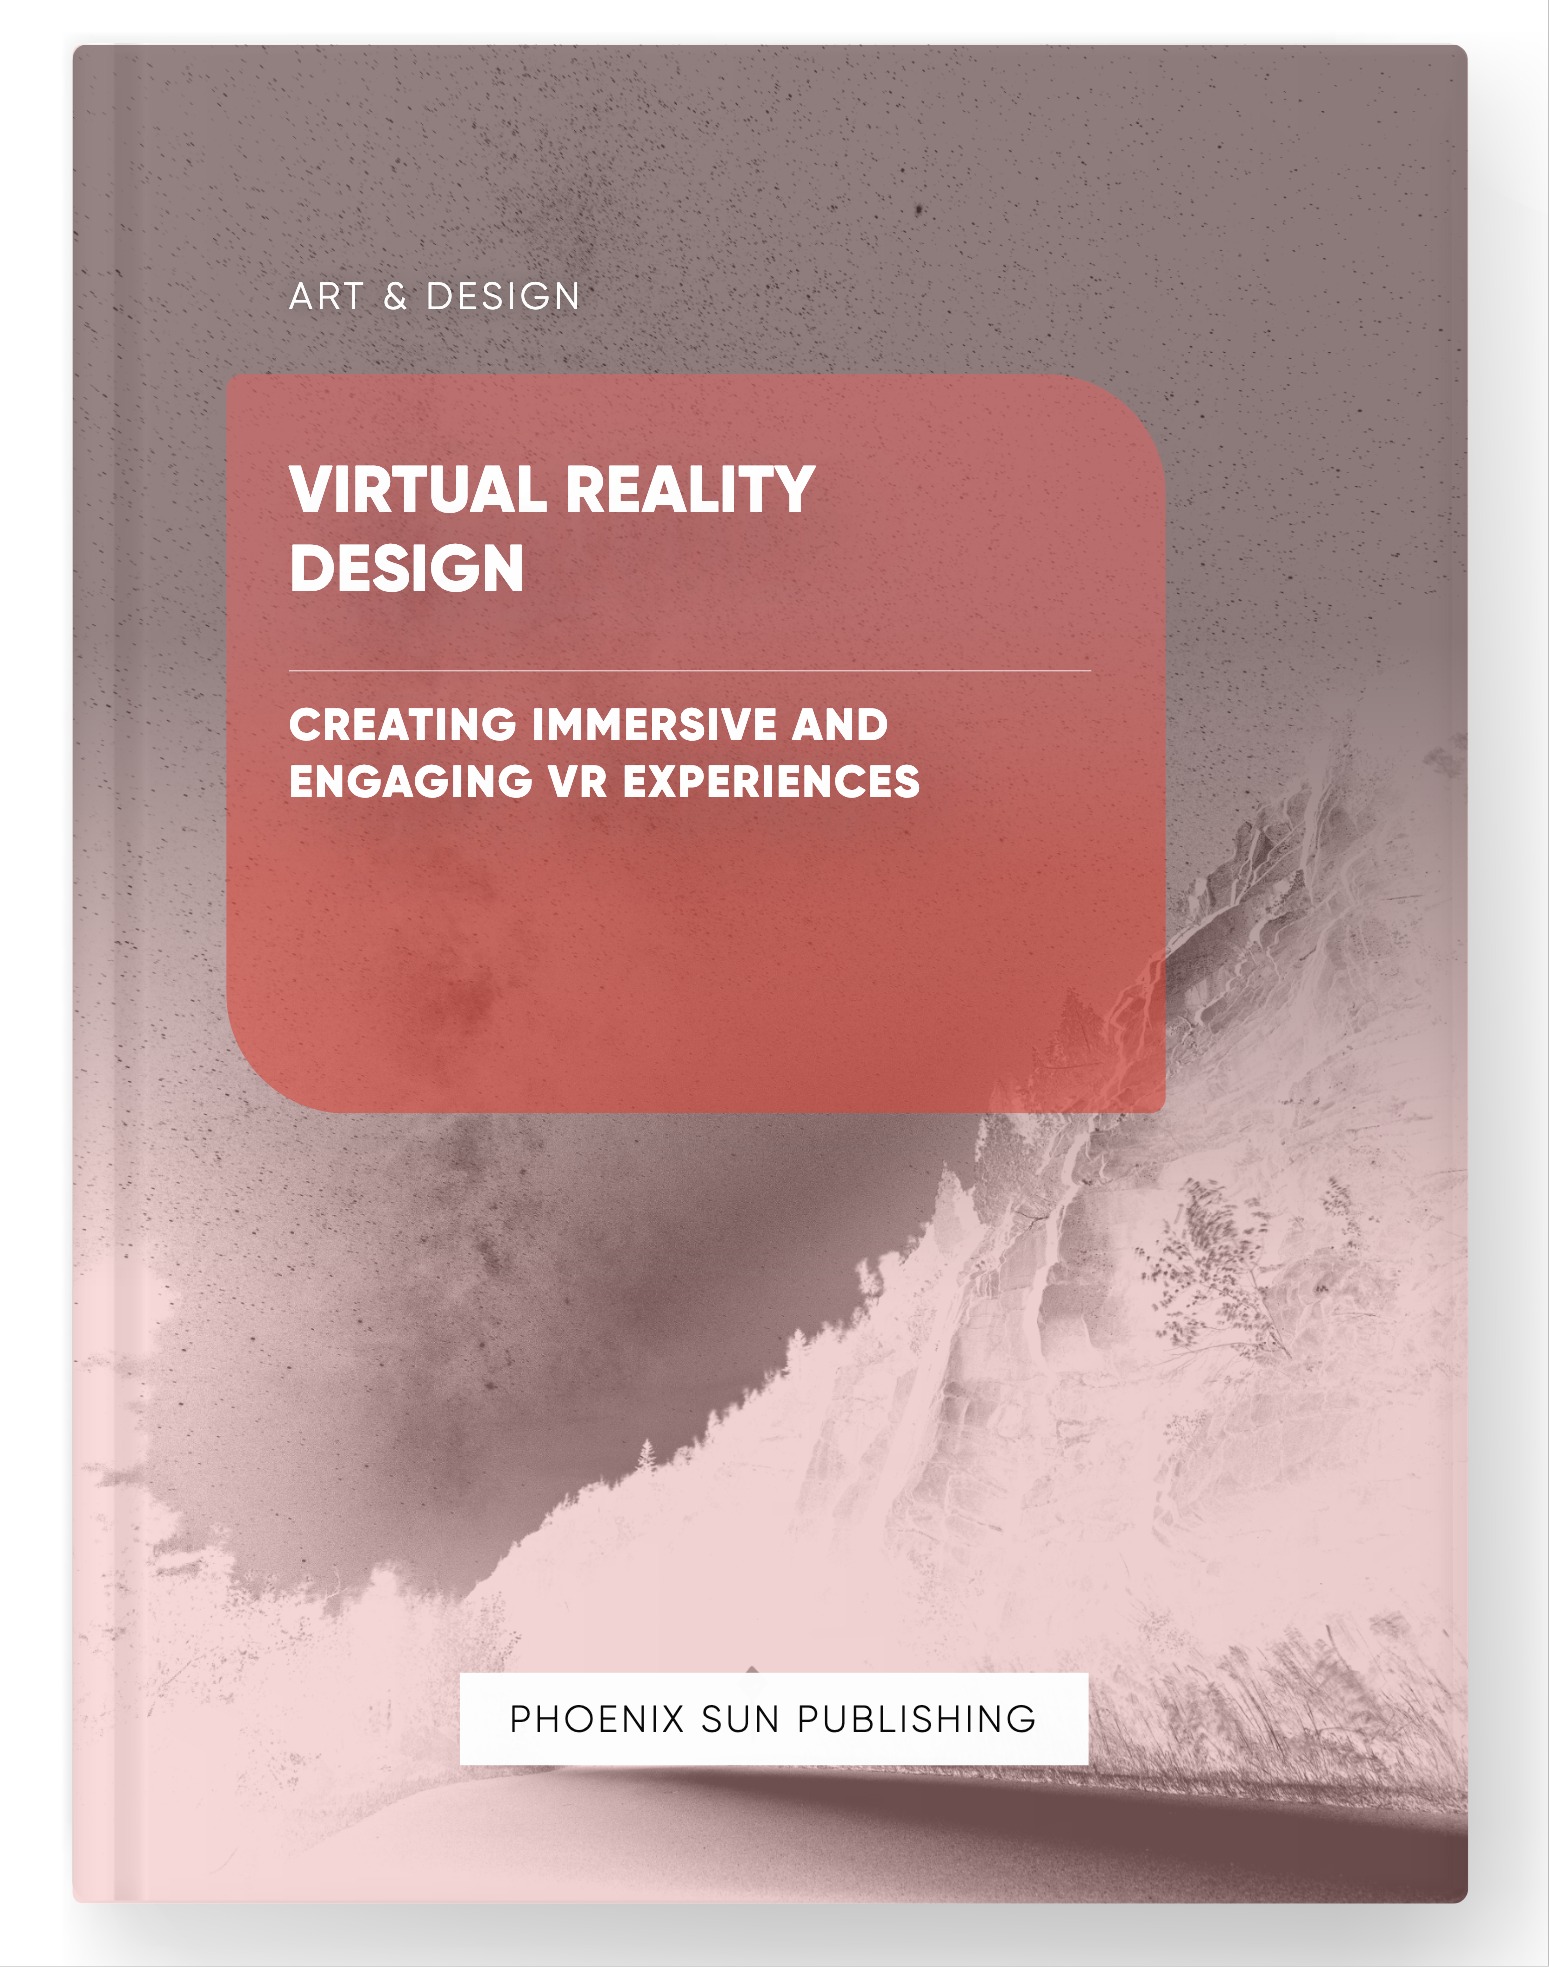 Virtual Reality Design – Creating Immersive and Engaging VR Experiences